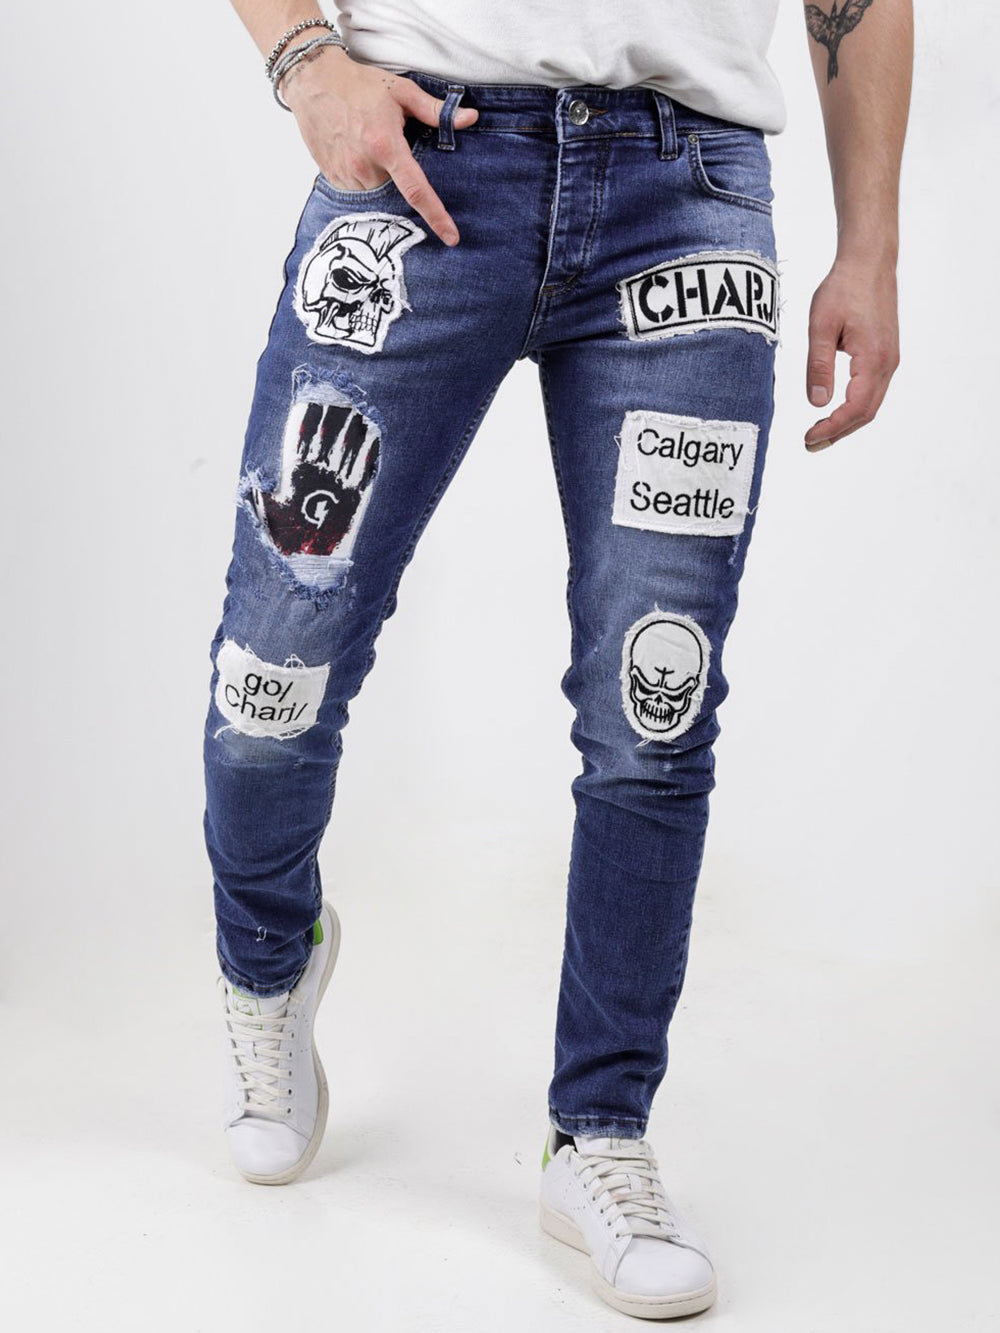 A man wearing a pair of HEADSTONE jeans with patches on them.